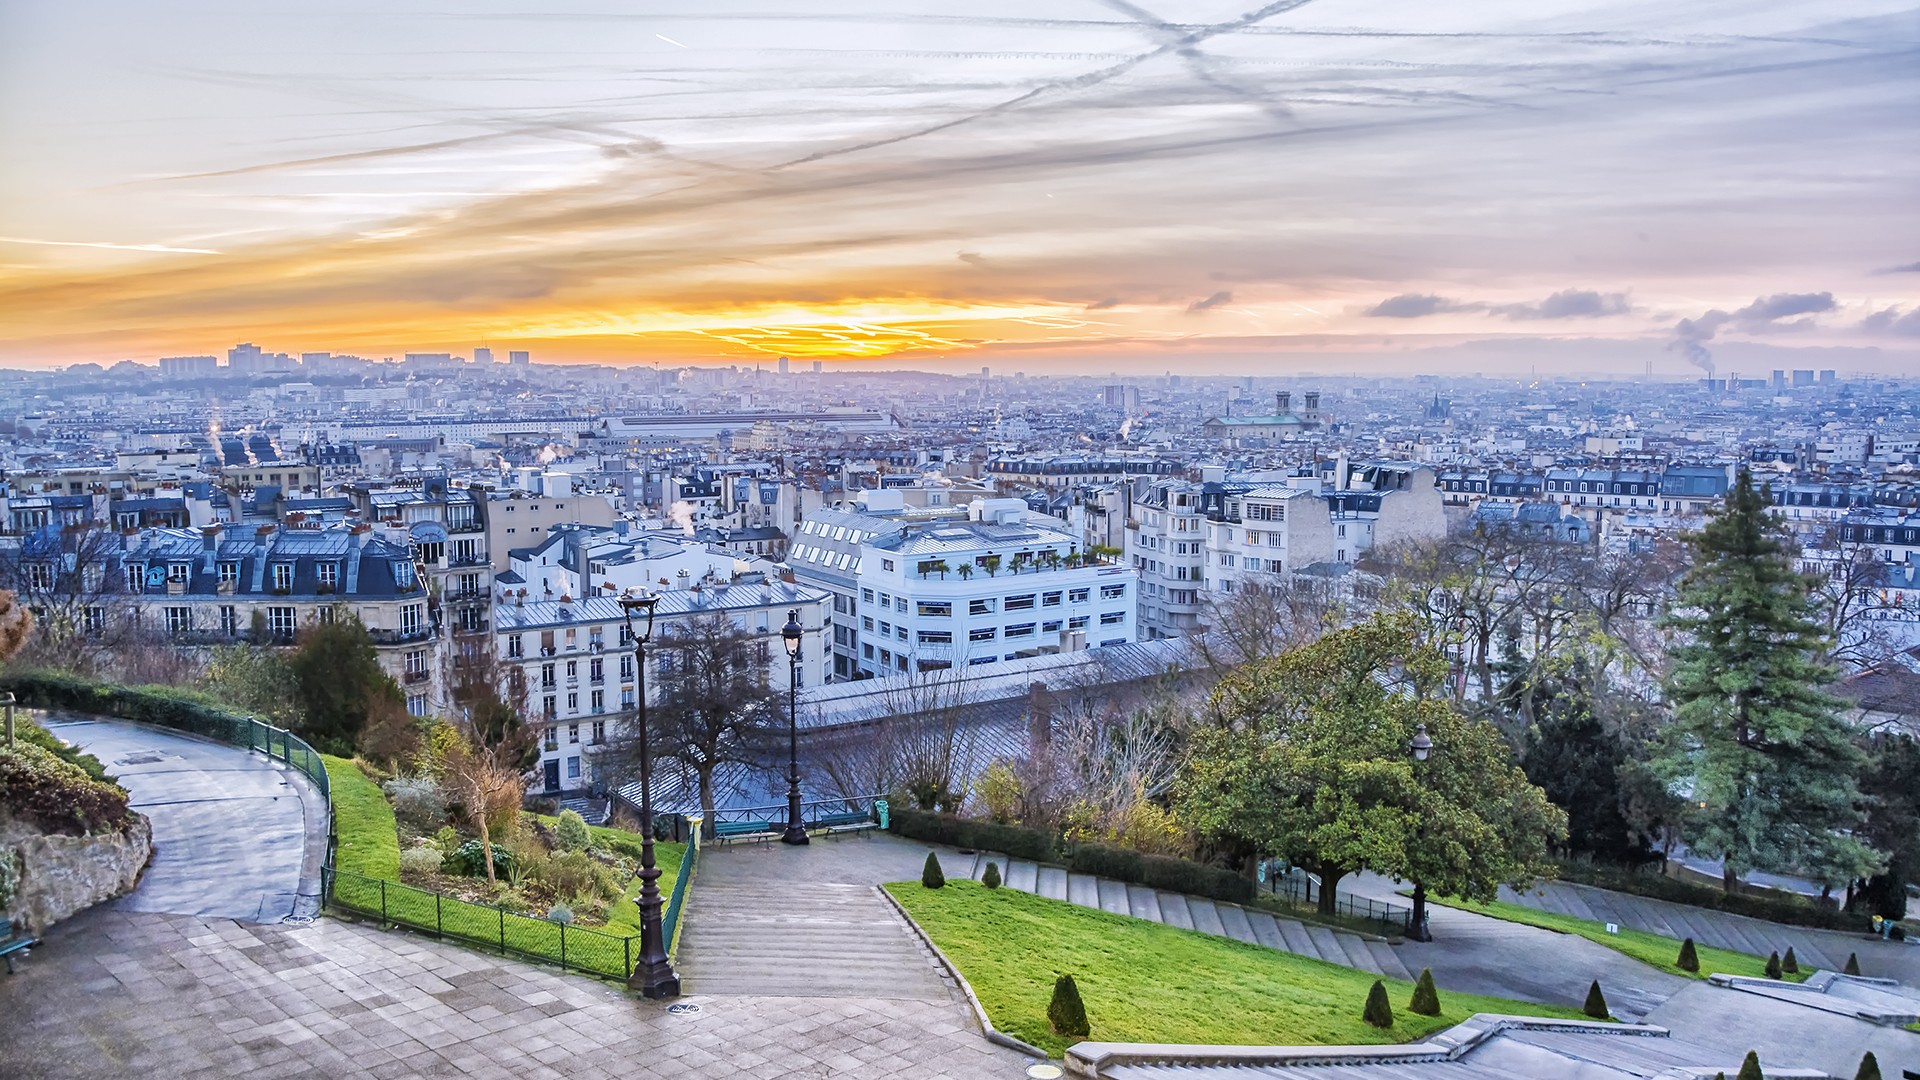 View from Montmartre Hill, Paris